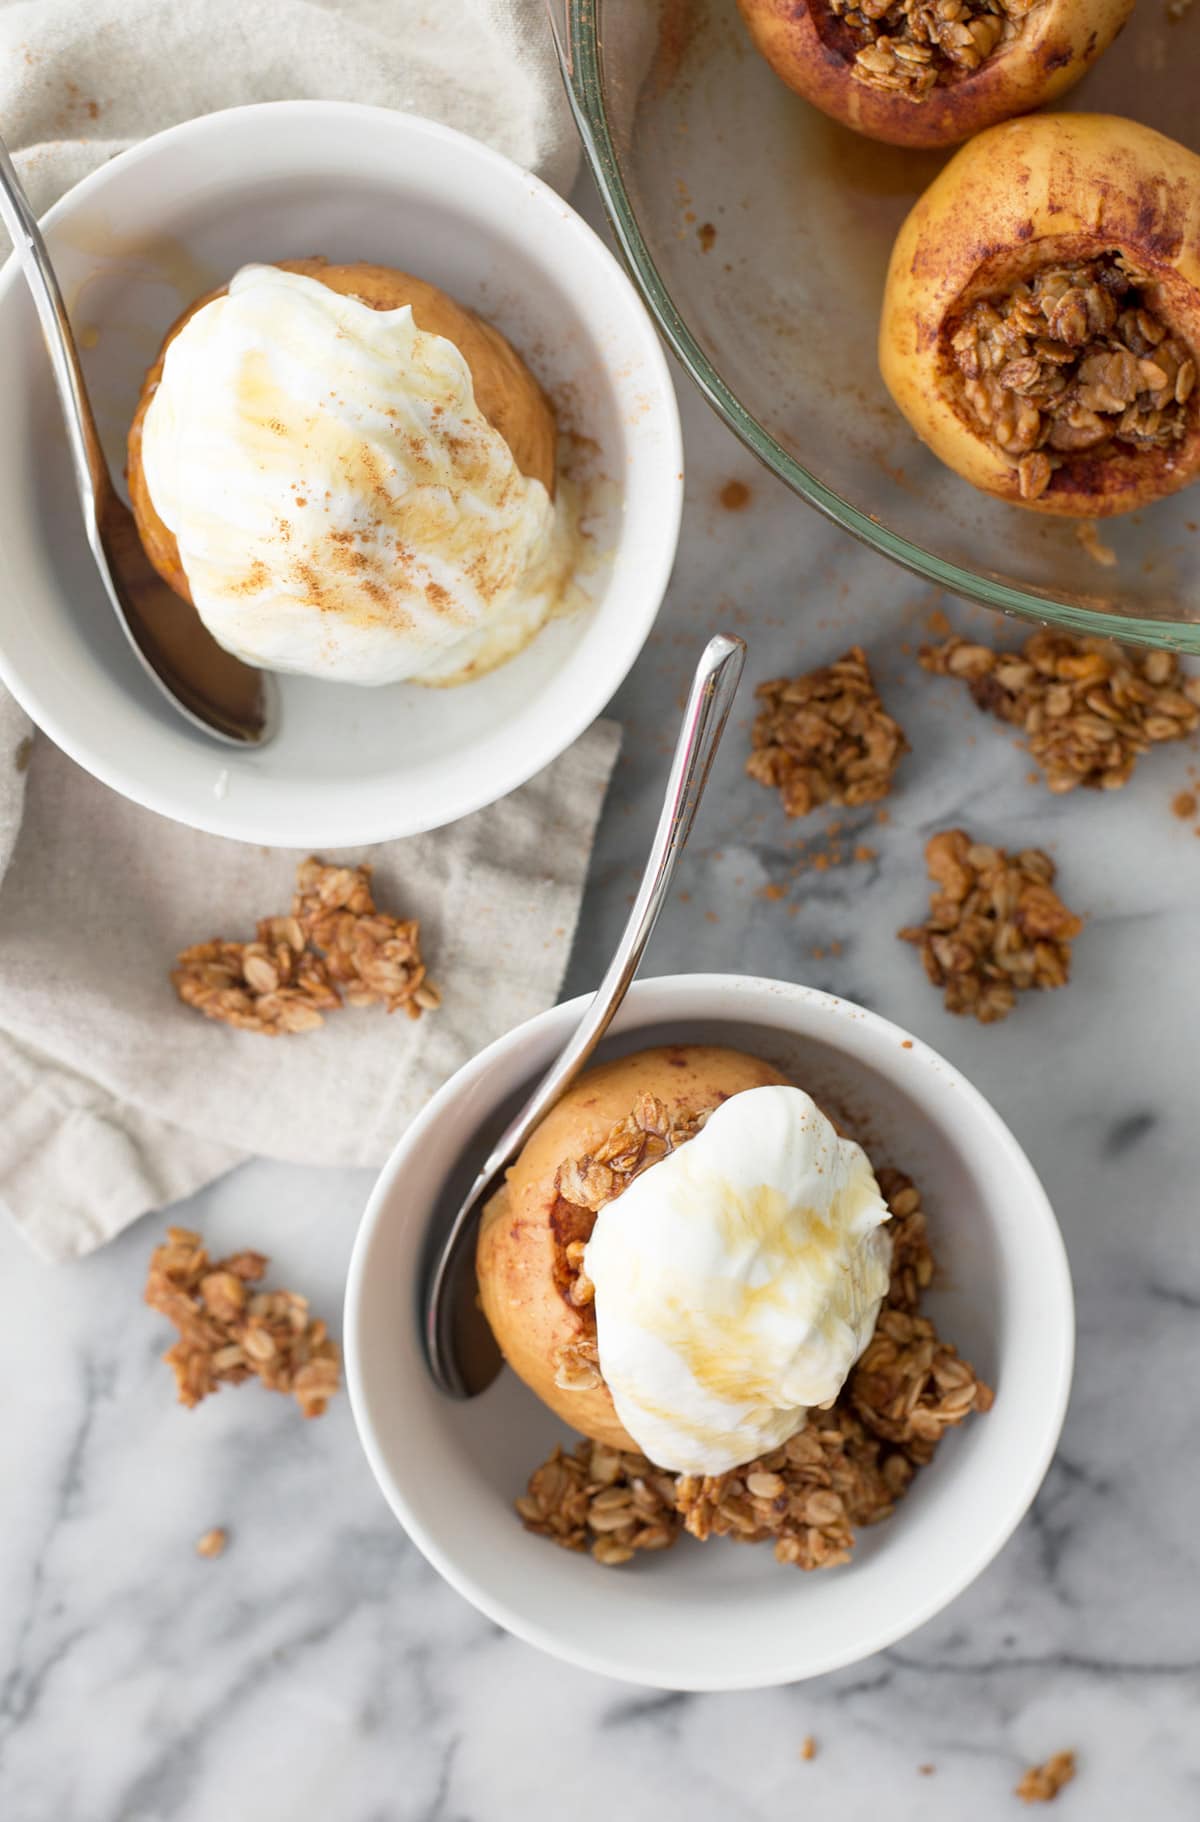 Set up a filling station! -- Healthy Easy Baked Apple Recipe with Spiced Granola and Yogurt - Sugar & Cloth - Houston Blogger - Fall - Recipe